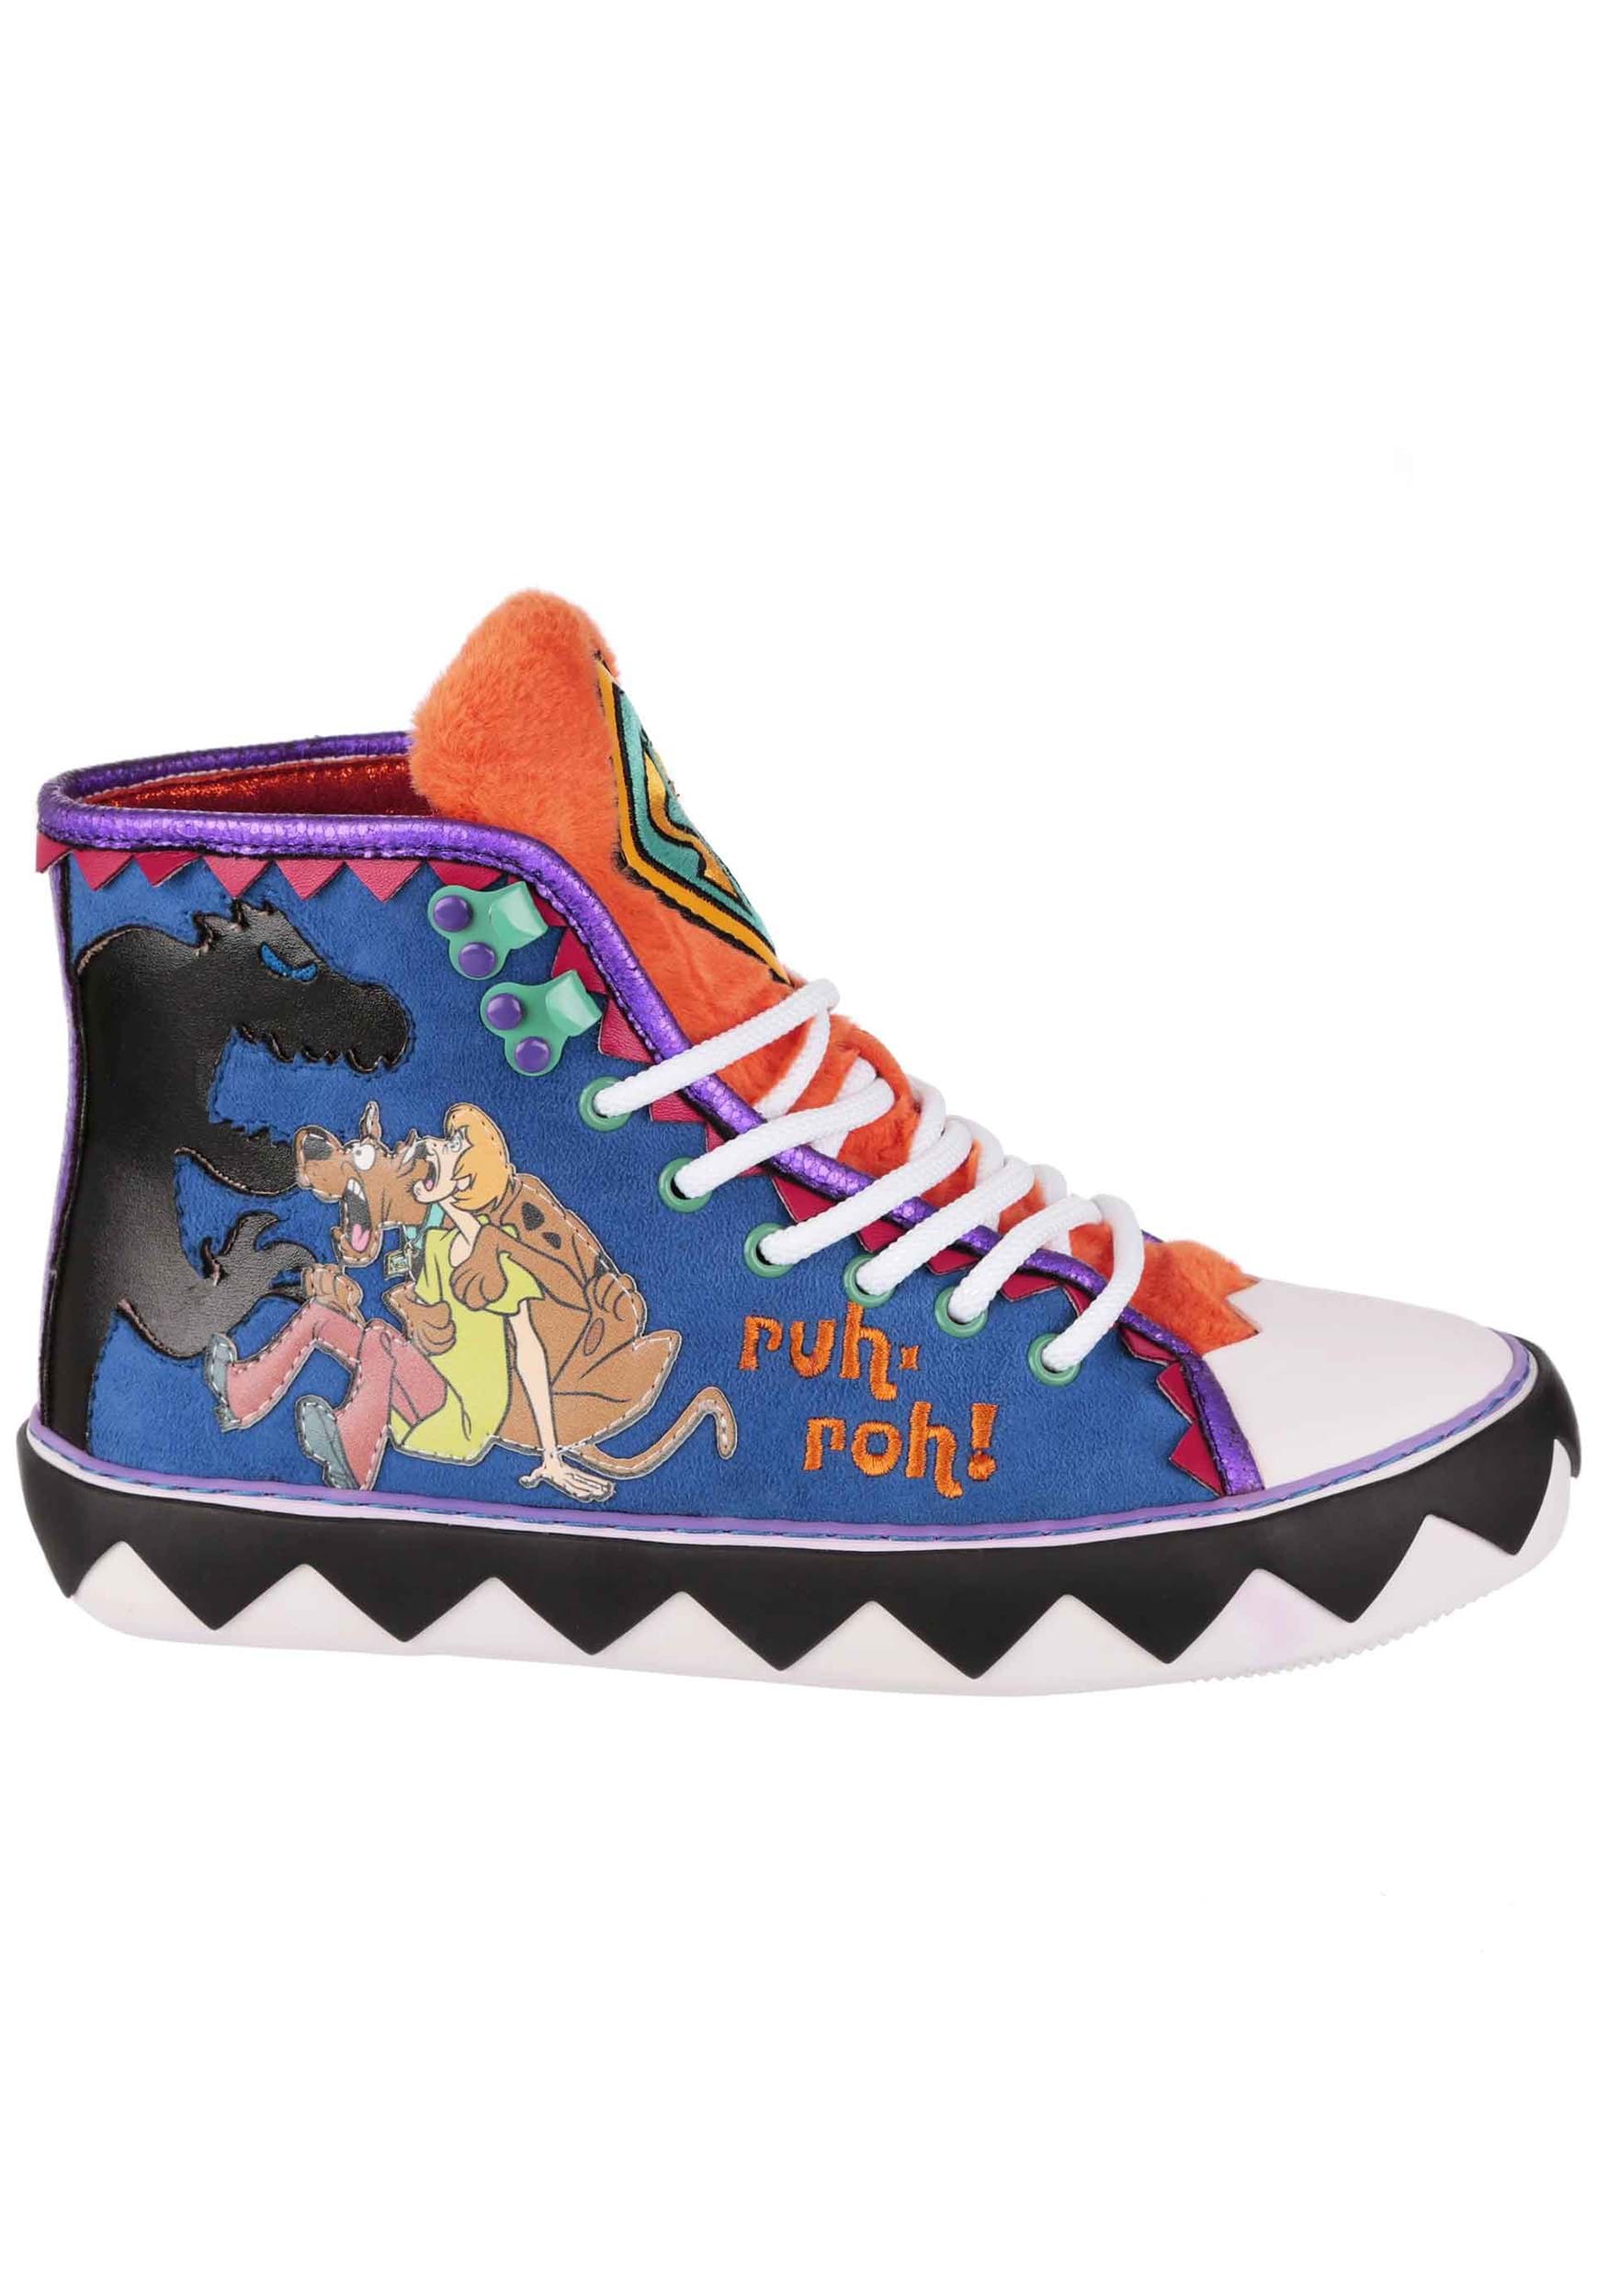 Irregular Choice Scooby Doo Zoinks Adult Sneakers